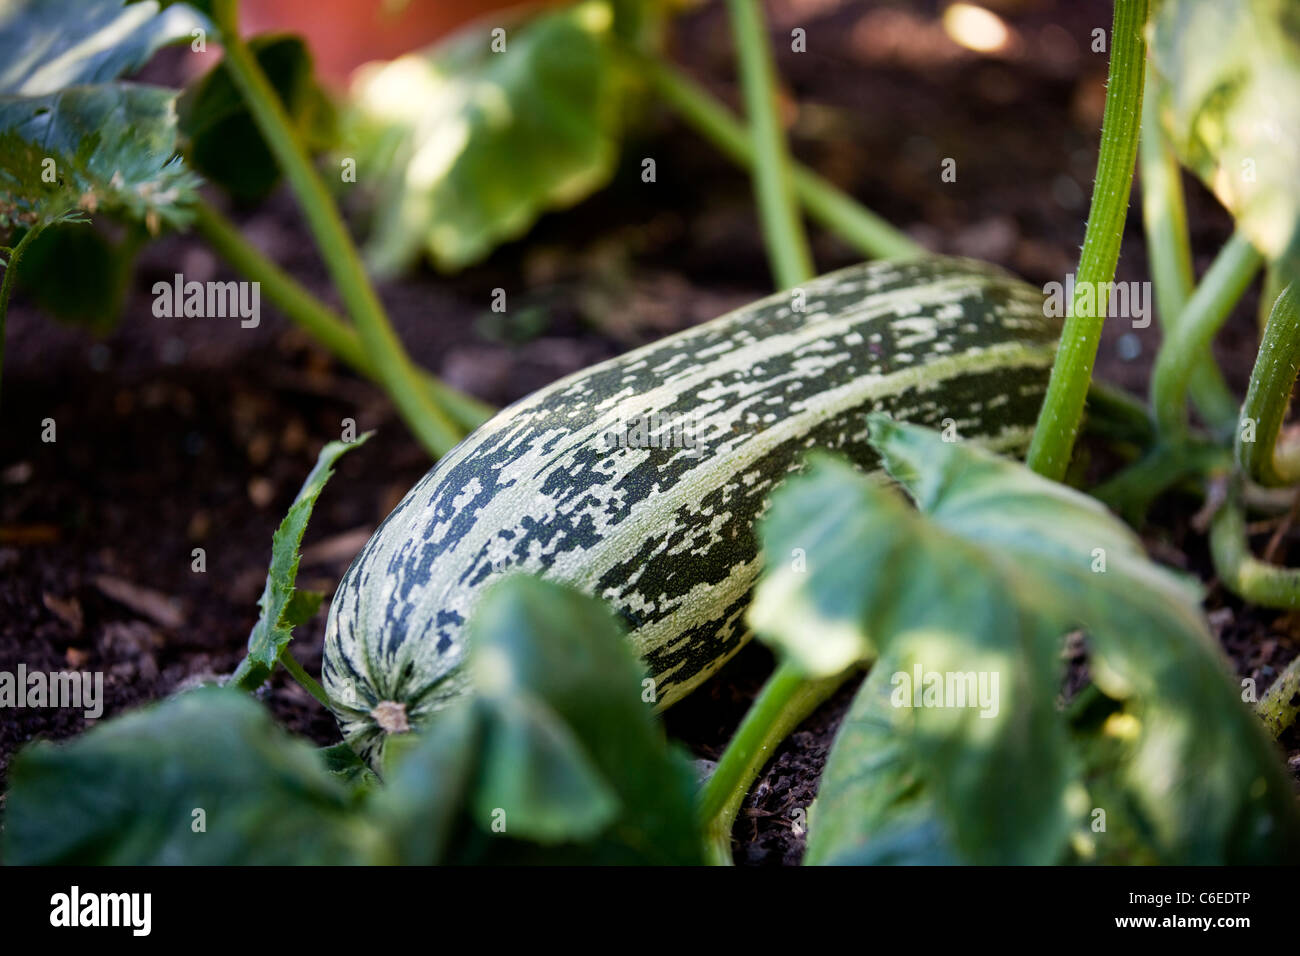 A marrow growing in a vegetable patch Stock Photo